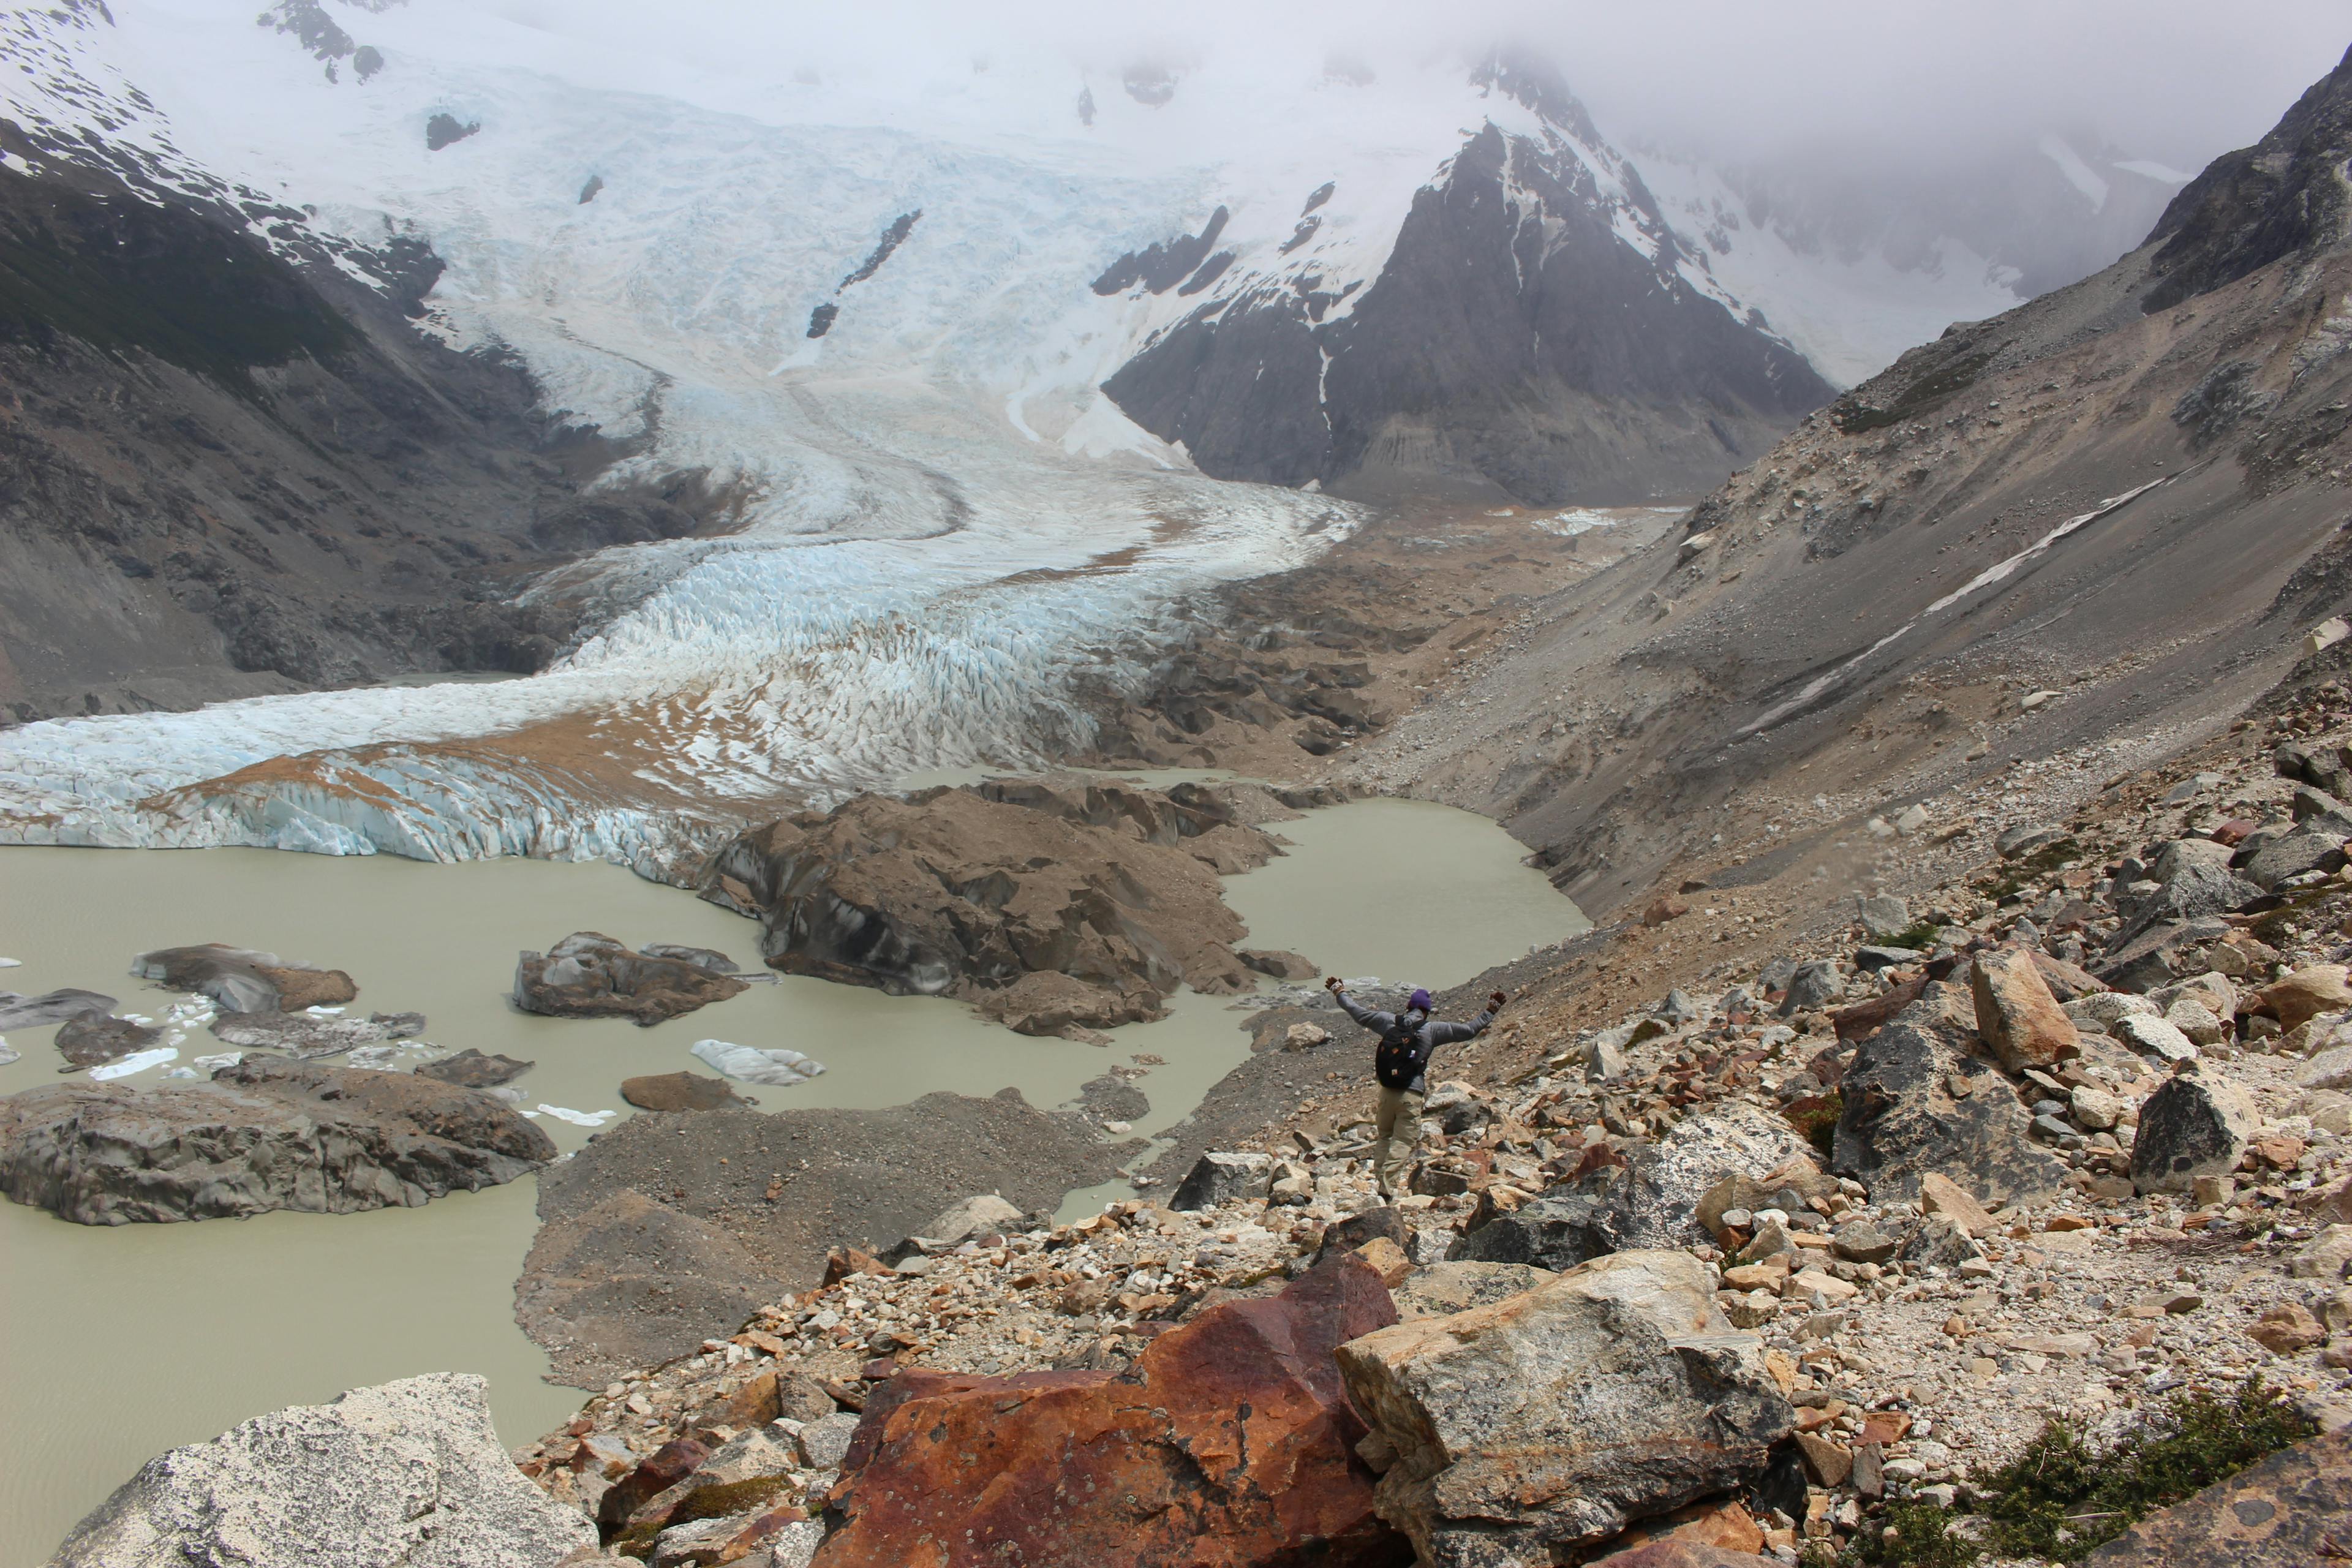 Cover Image for El Chaltén: Hiking and Other Stuff Too